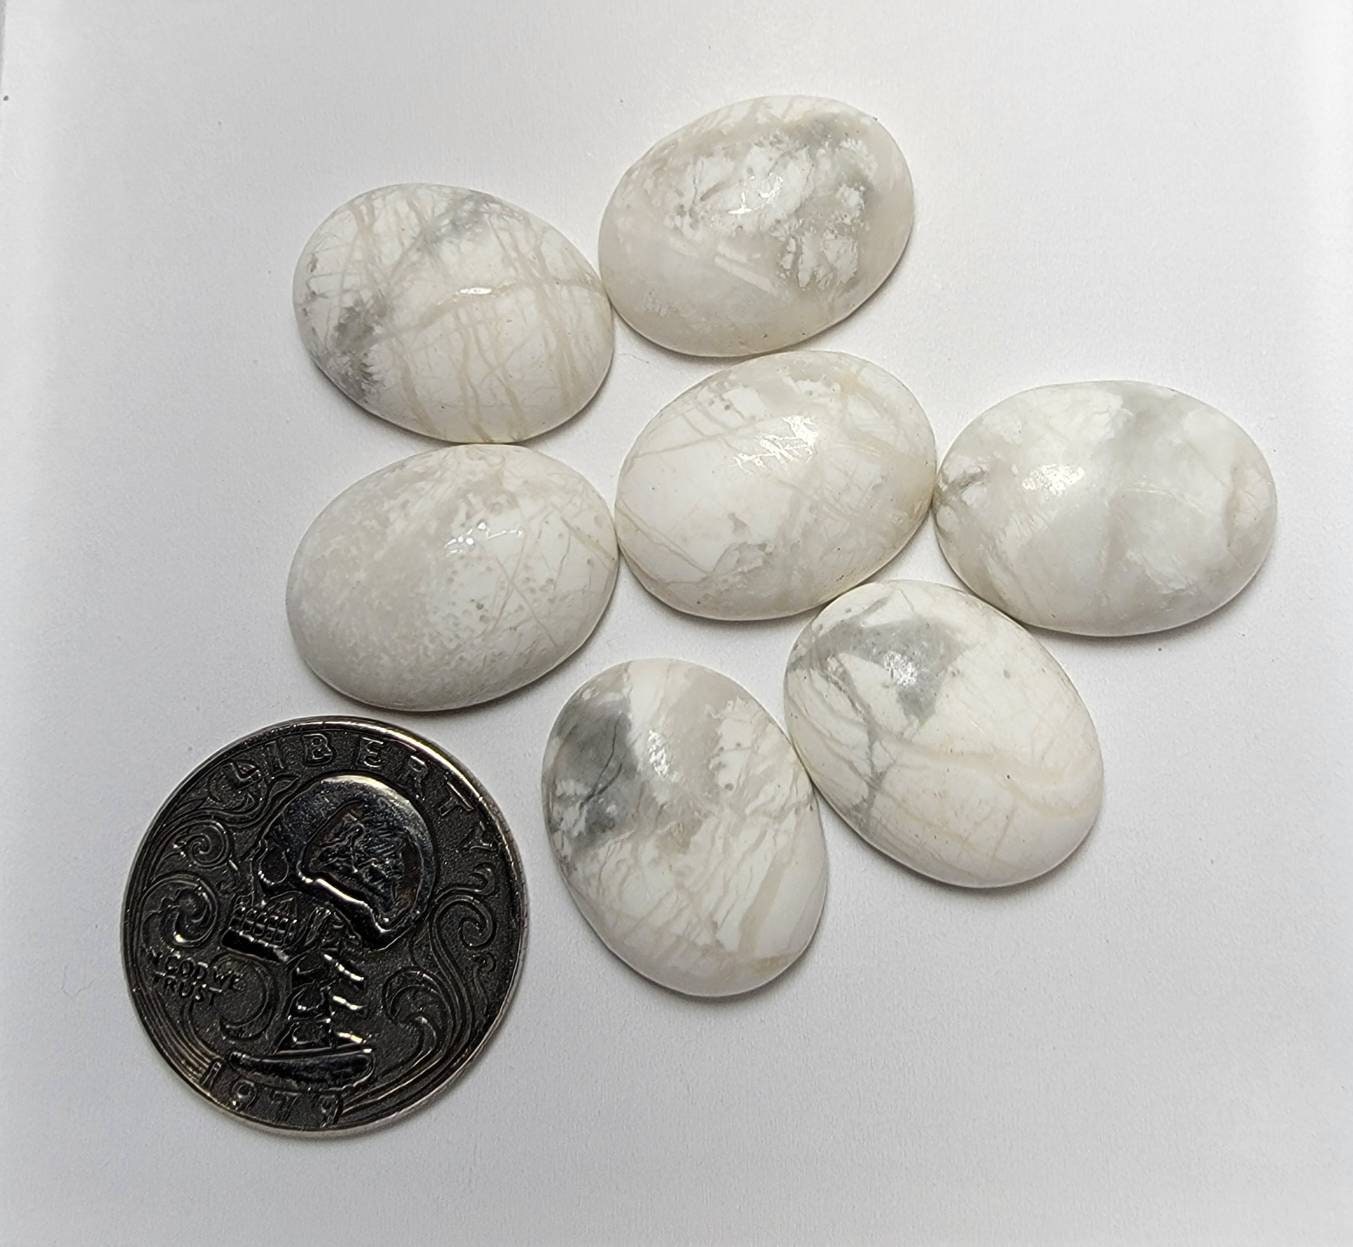 Oval Howlite Cabochon Lot - 24 grams - 7pc - 059